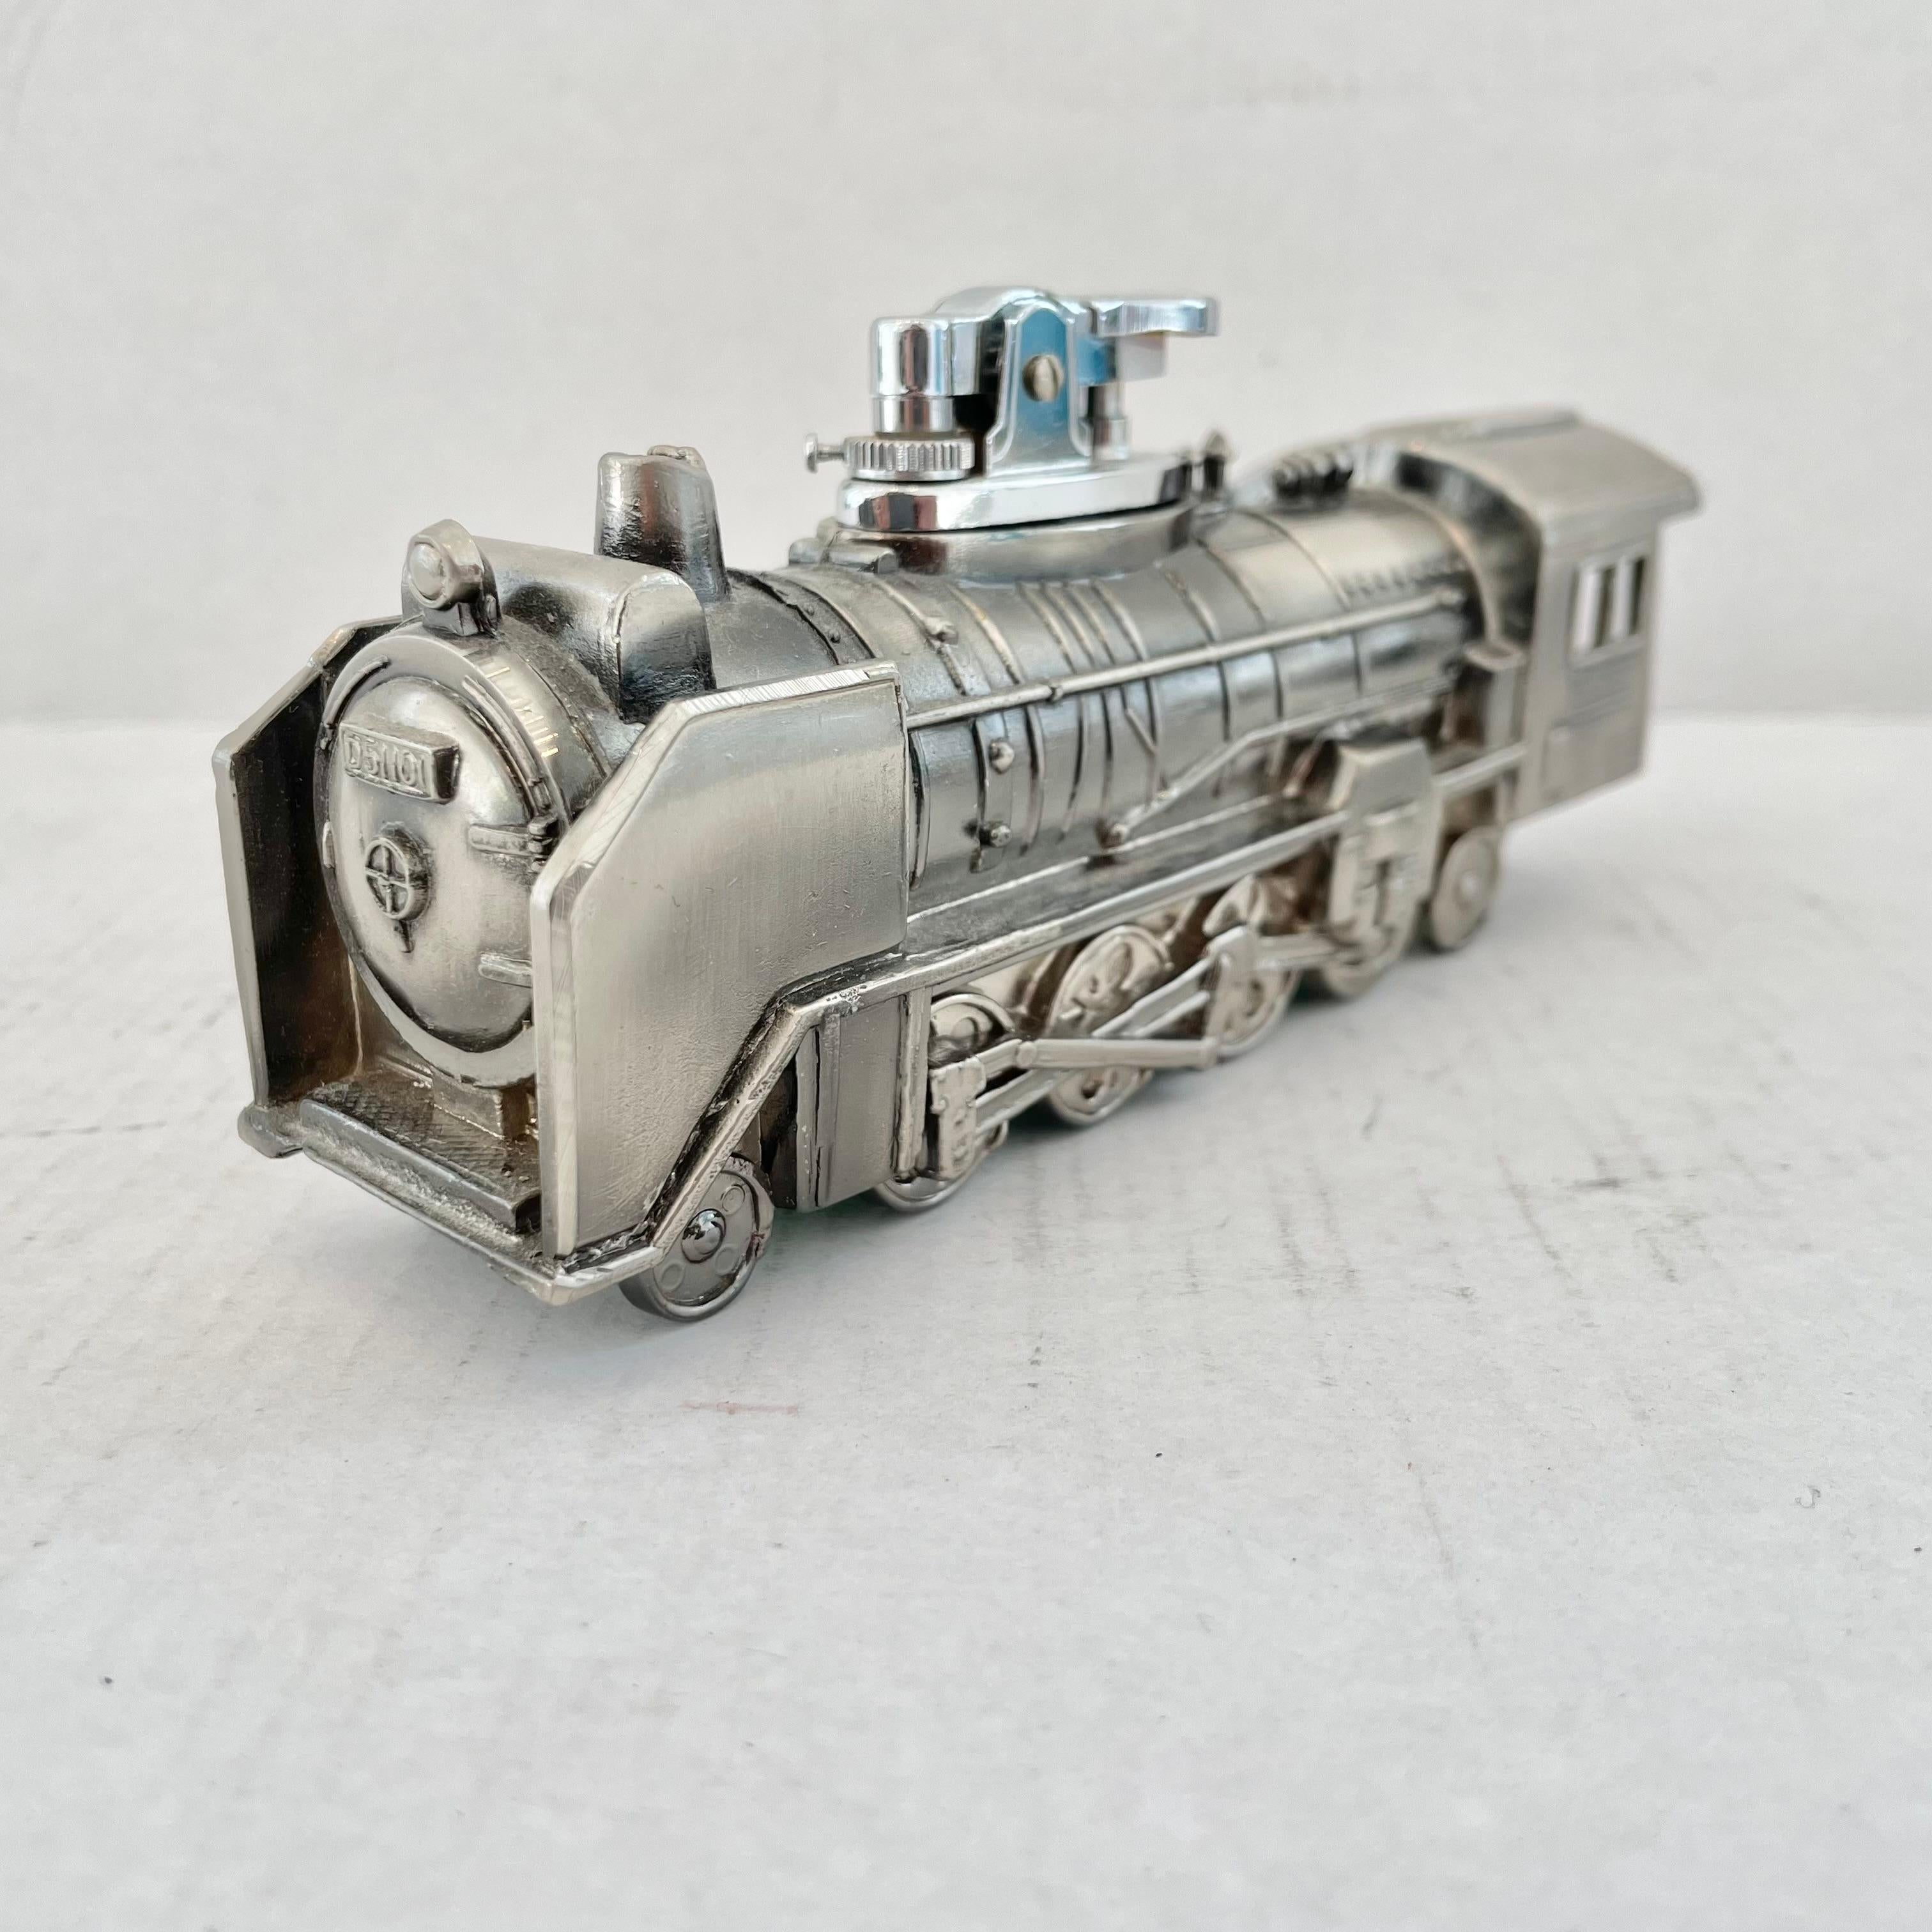 Cool vintage table lighter in the shape of a train engine. Made in Japan, 1980s. This piece has great balance and details. 'Japan' sticker on the green felt underside. Cool tobacco accessory and conversation piece. Working lighter. Good vintage